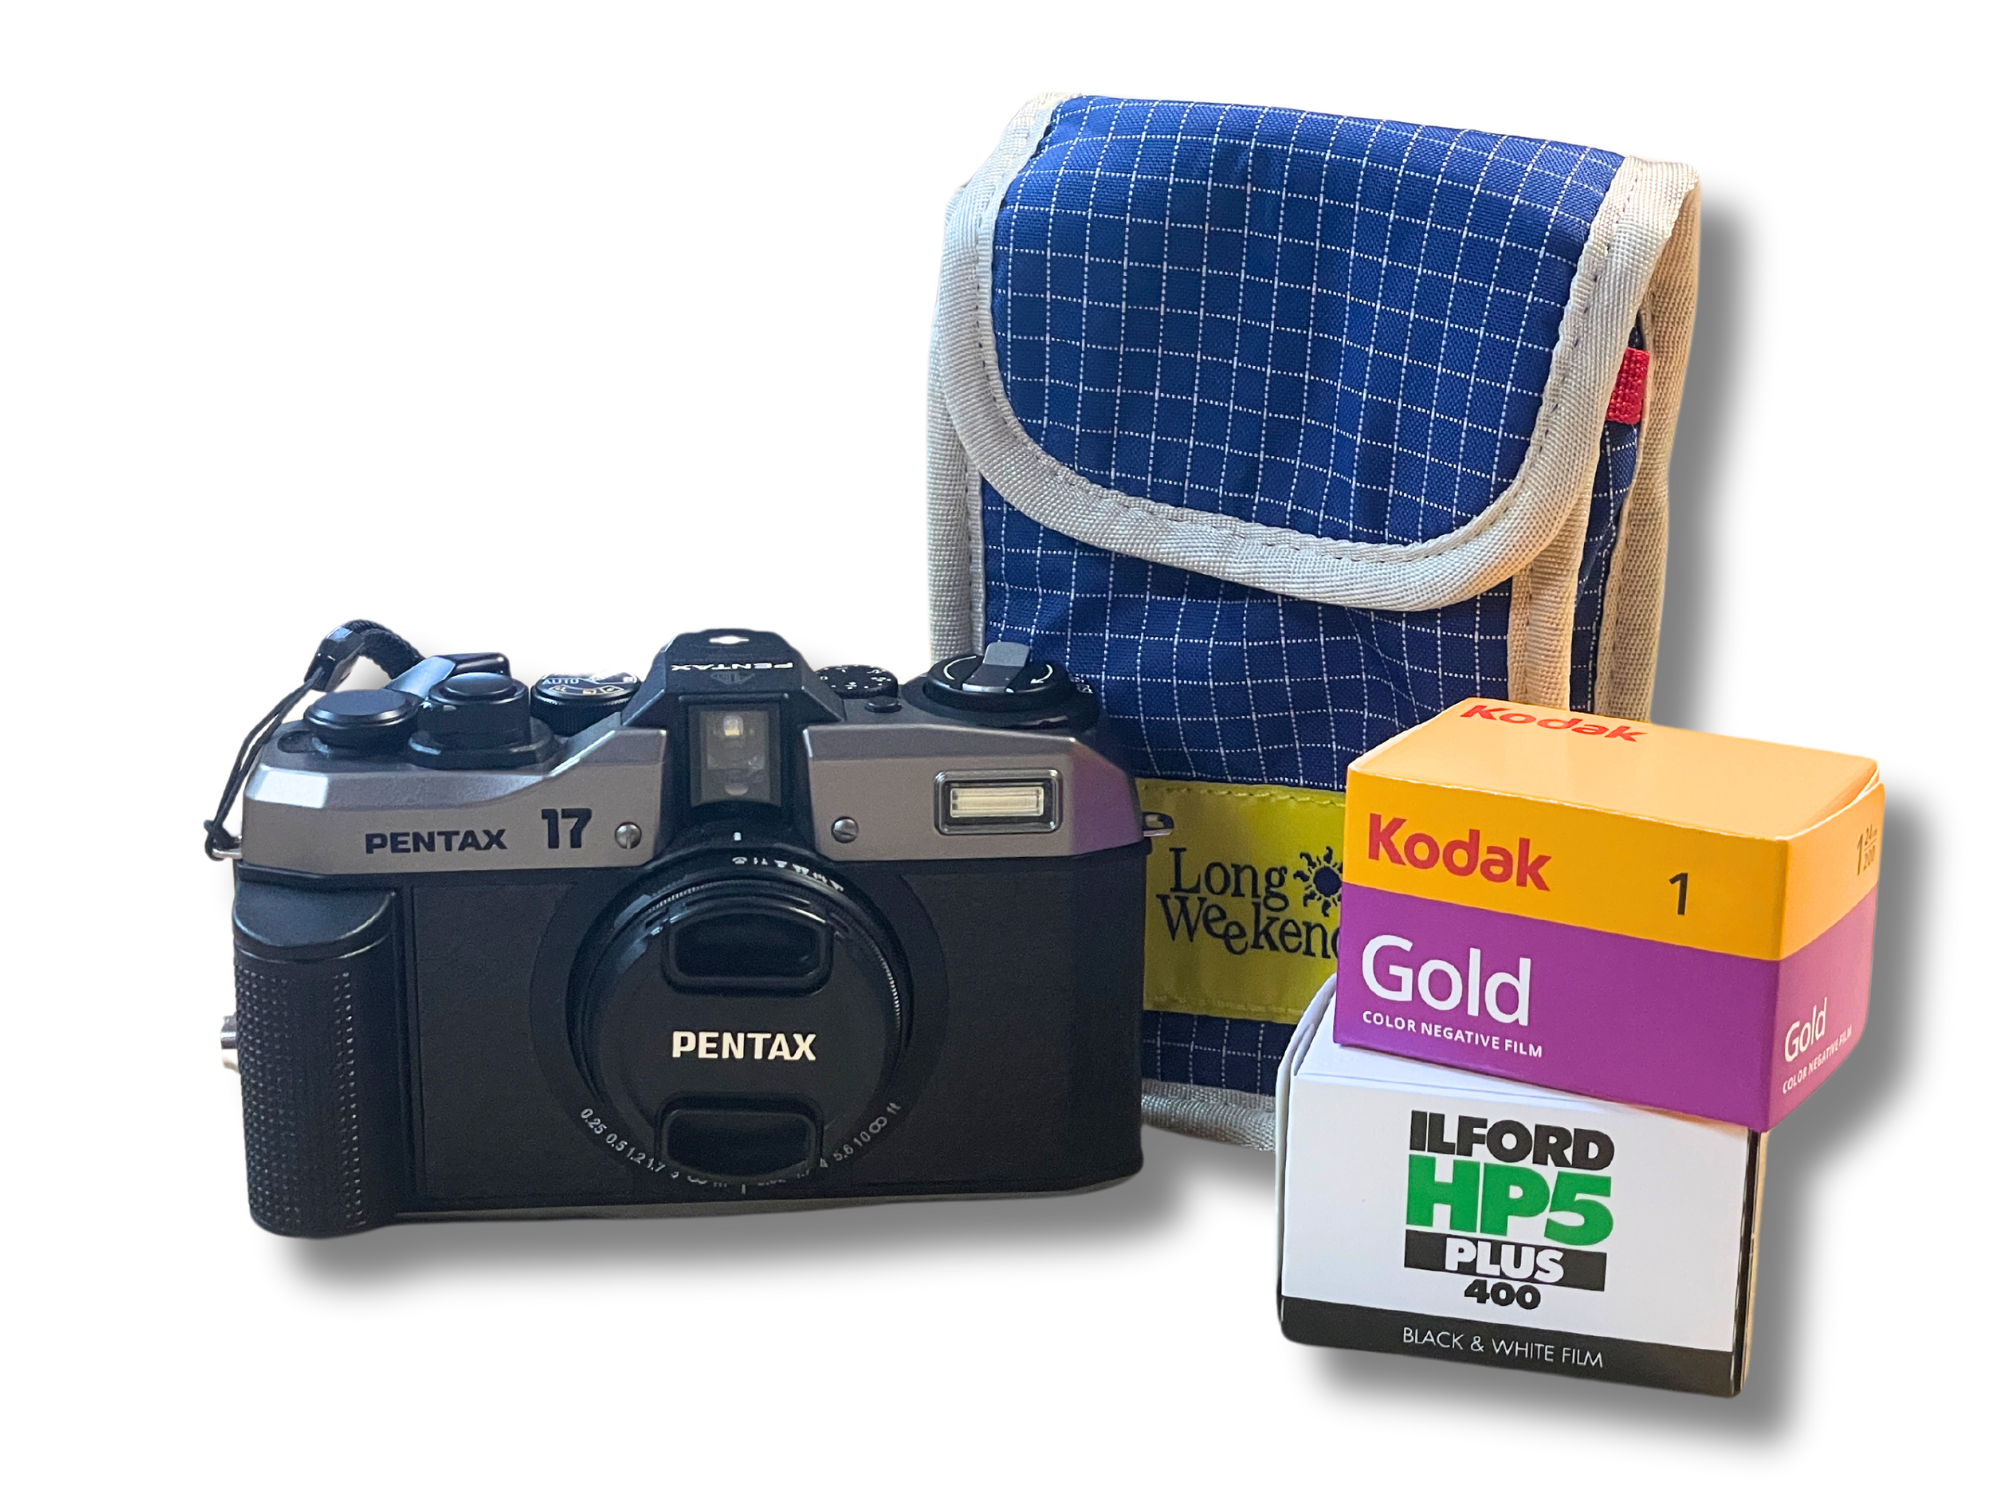 Pentax 17 with Camera Case and Films Bundle